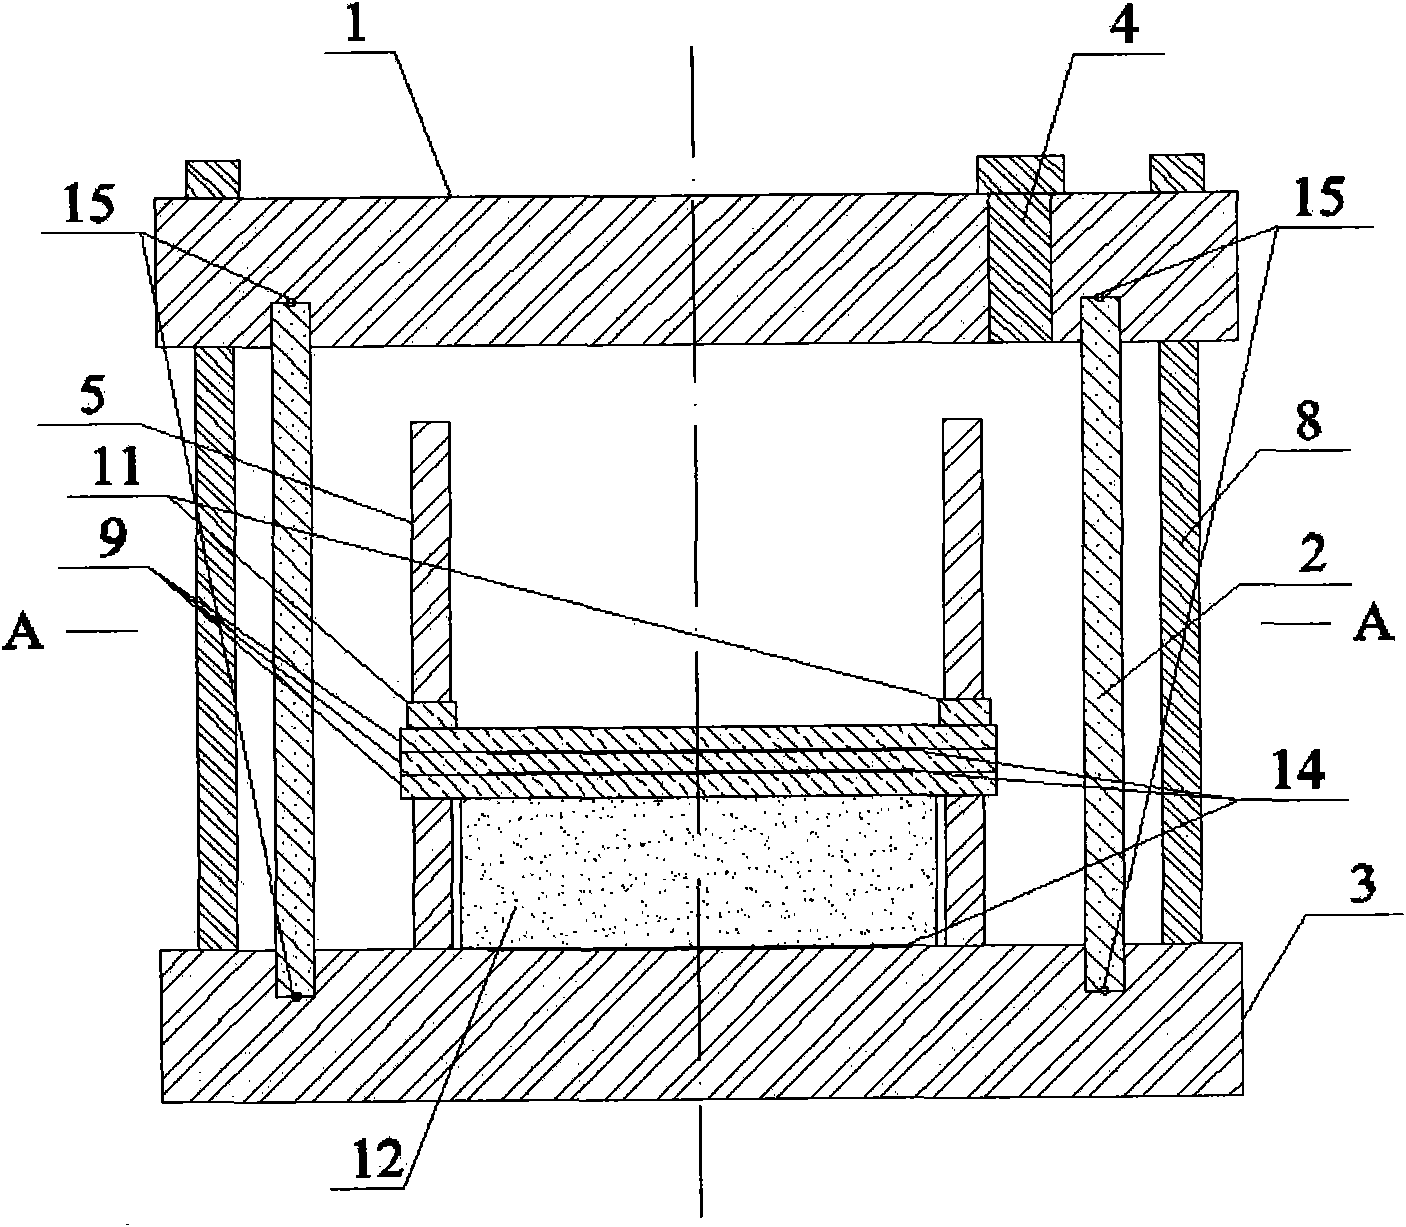 Test device for measuring soil suction by filter paper method